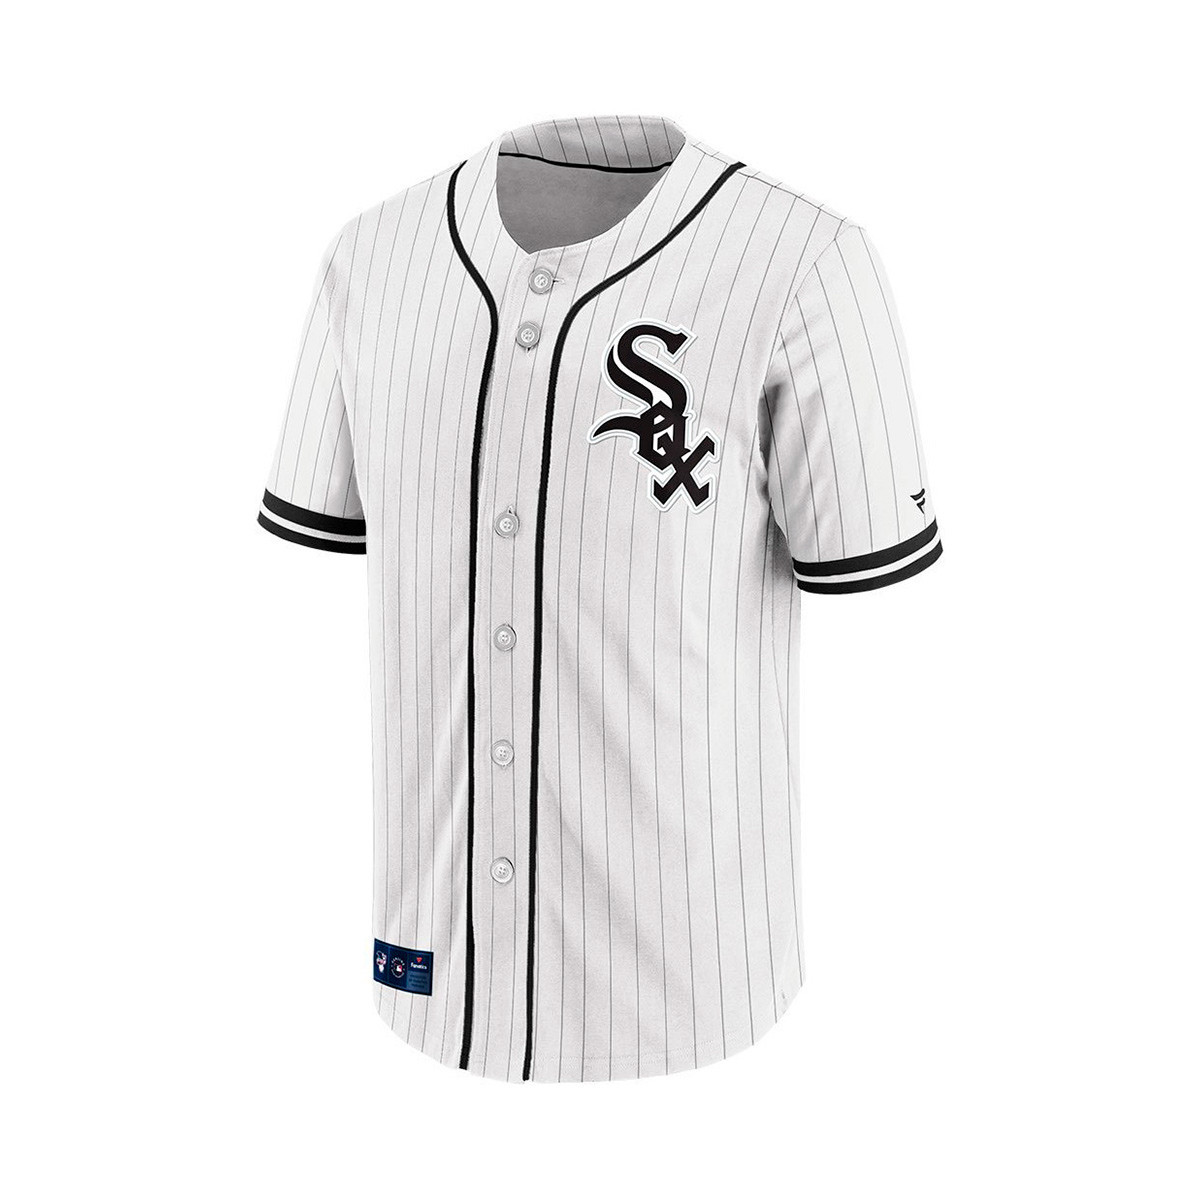 Mens Chicago White Sox Jerseys, White Sox Jersey, Chicago White Sox  Uniforms